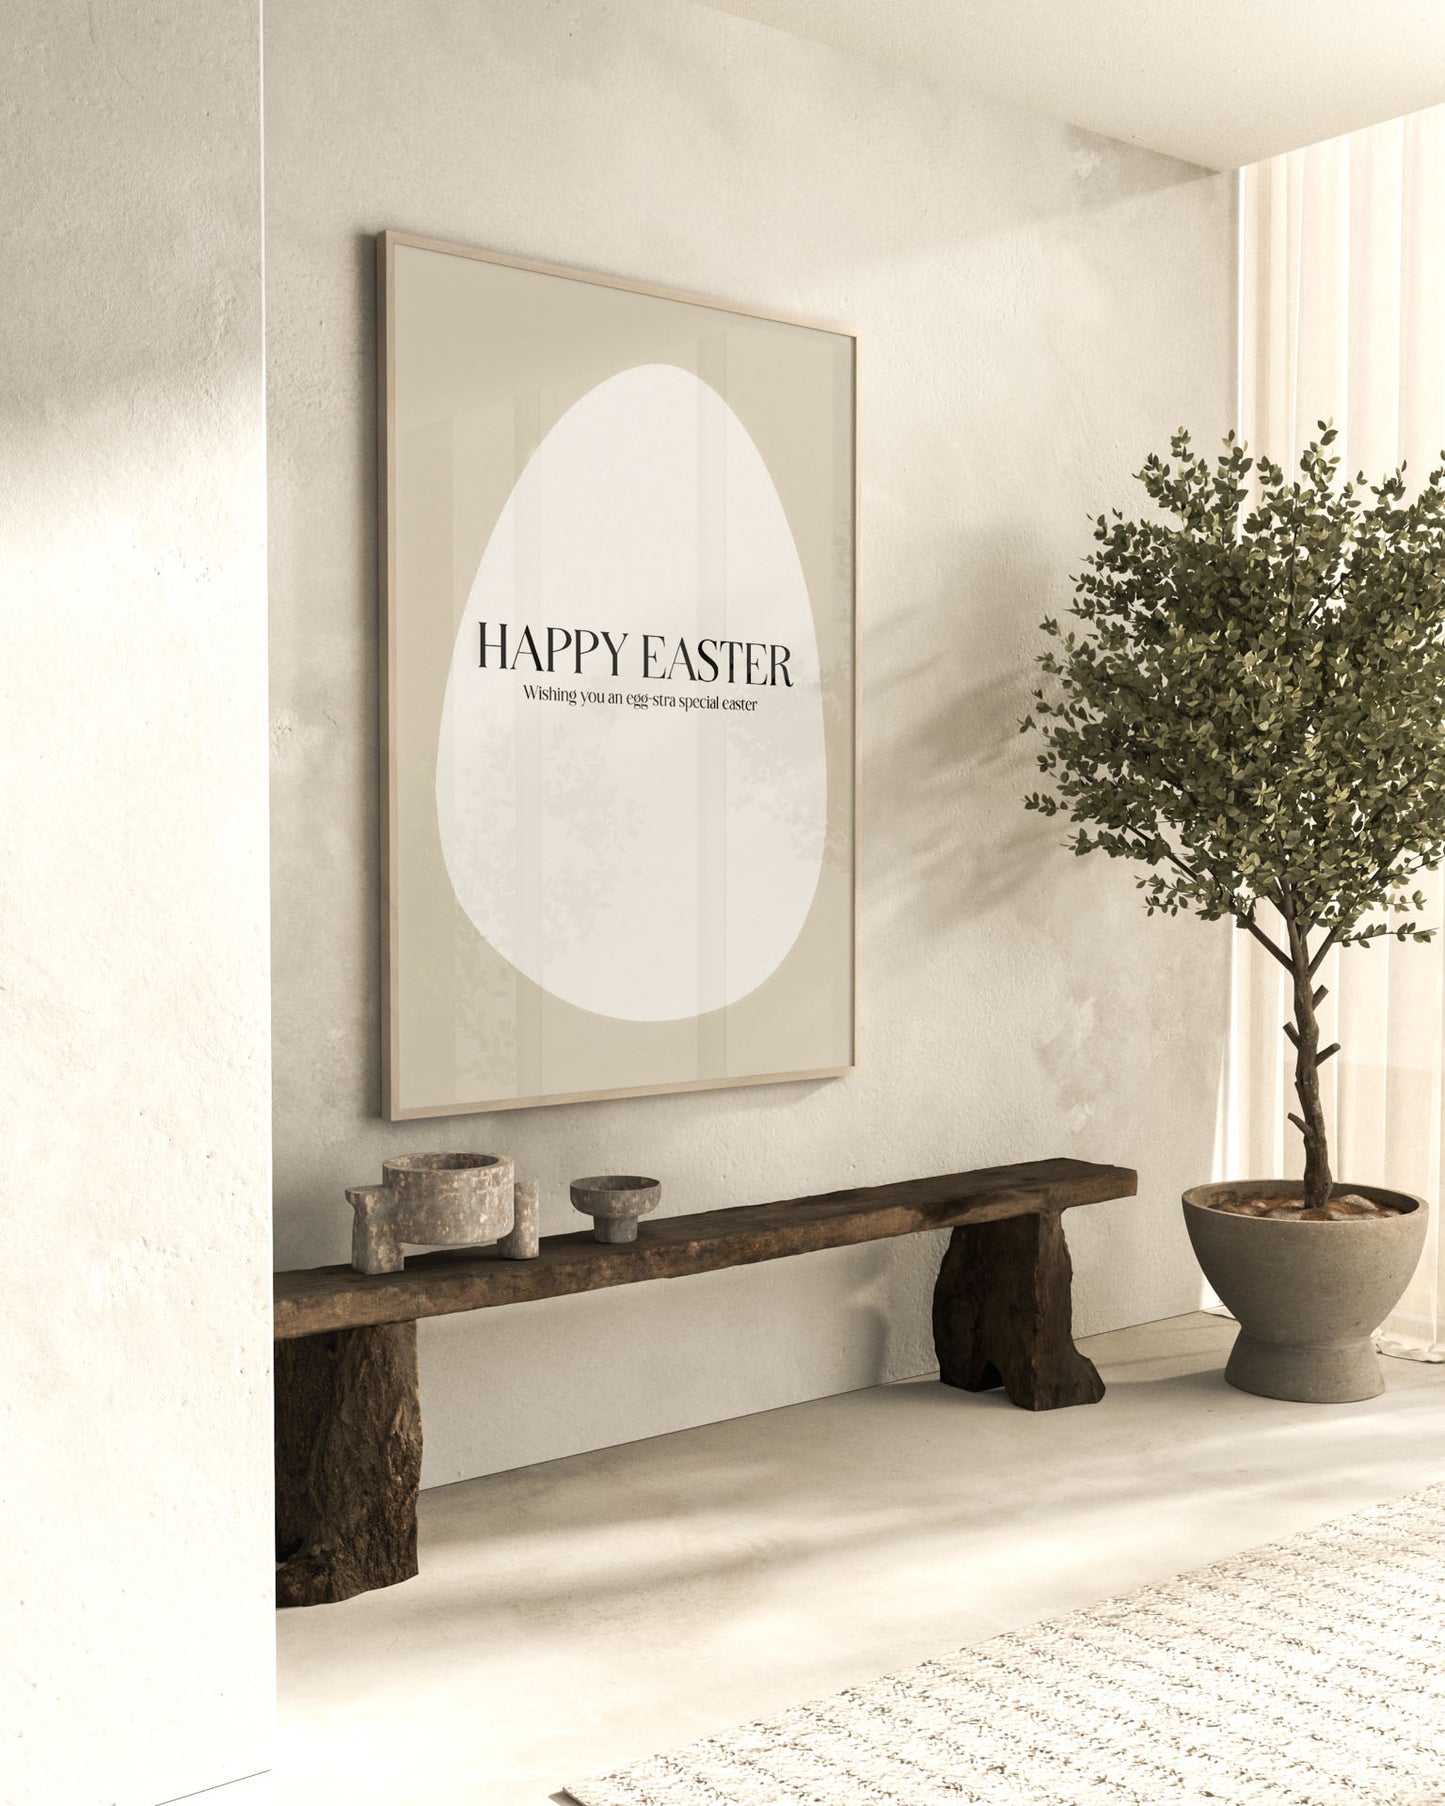 HAPPY EASTER POSTER